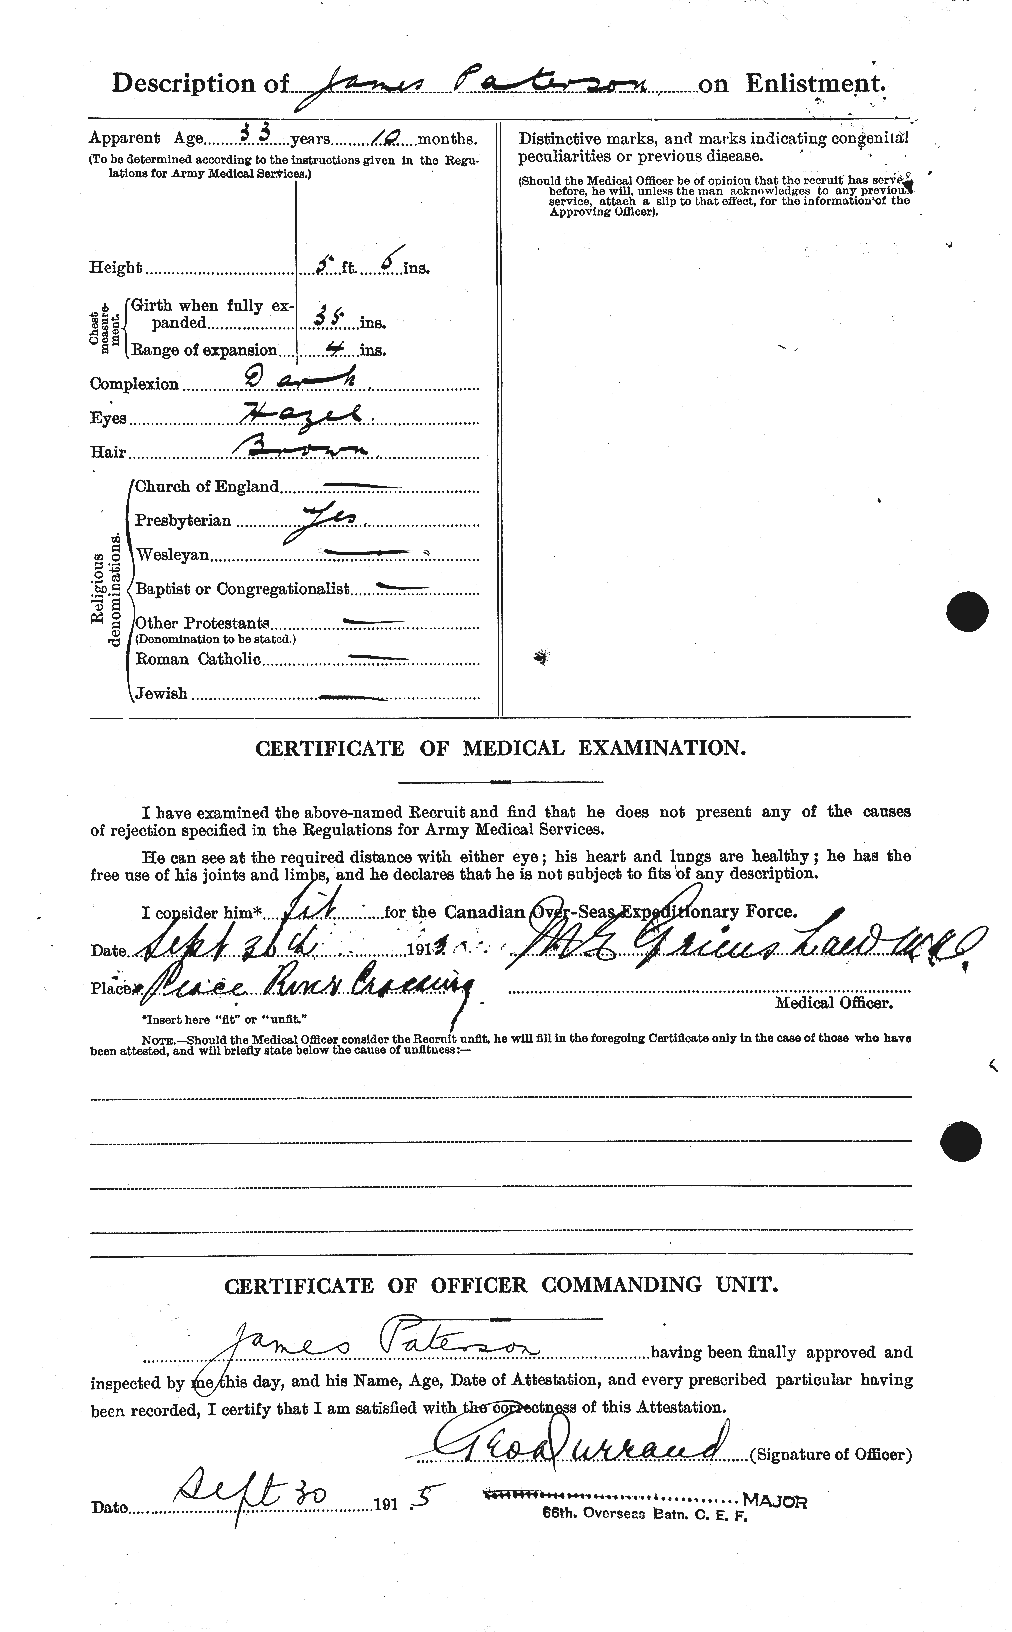 Personnel Records of the First World War - CEF 567633b